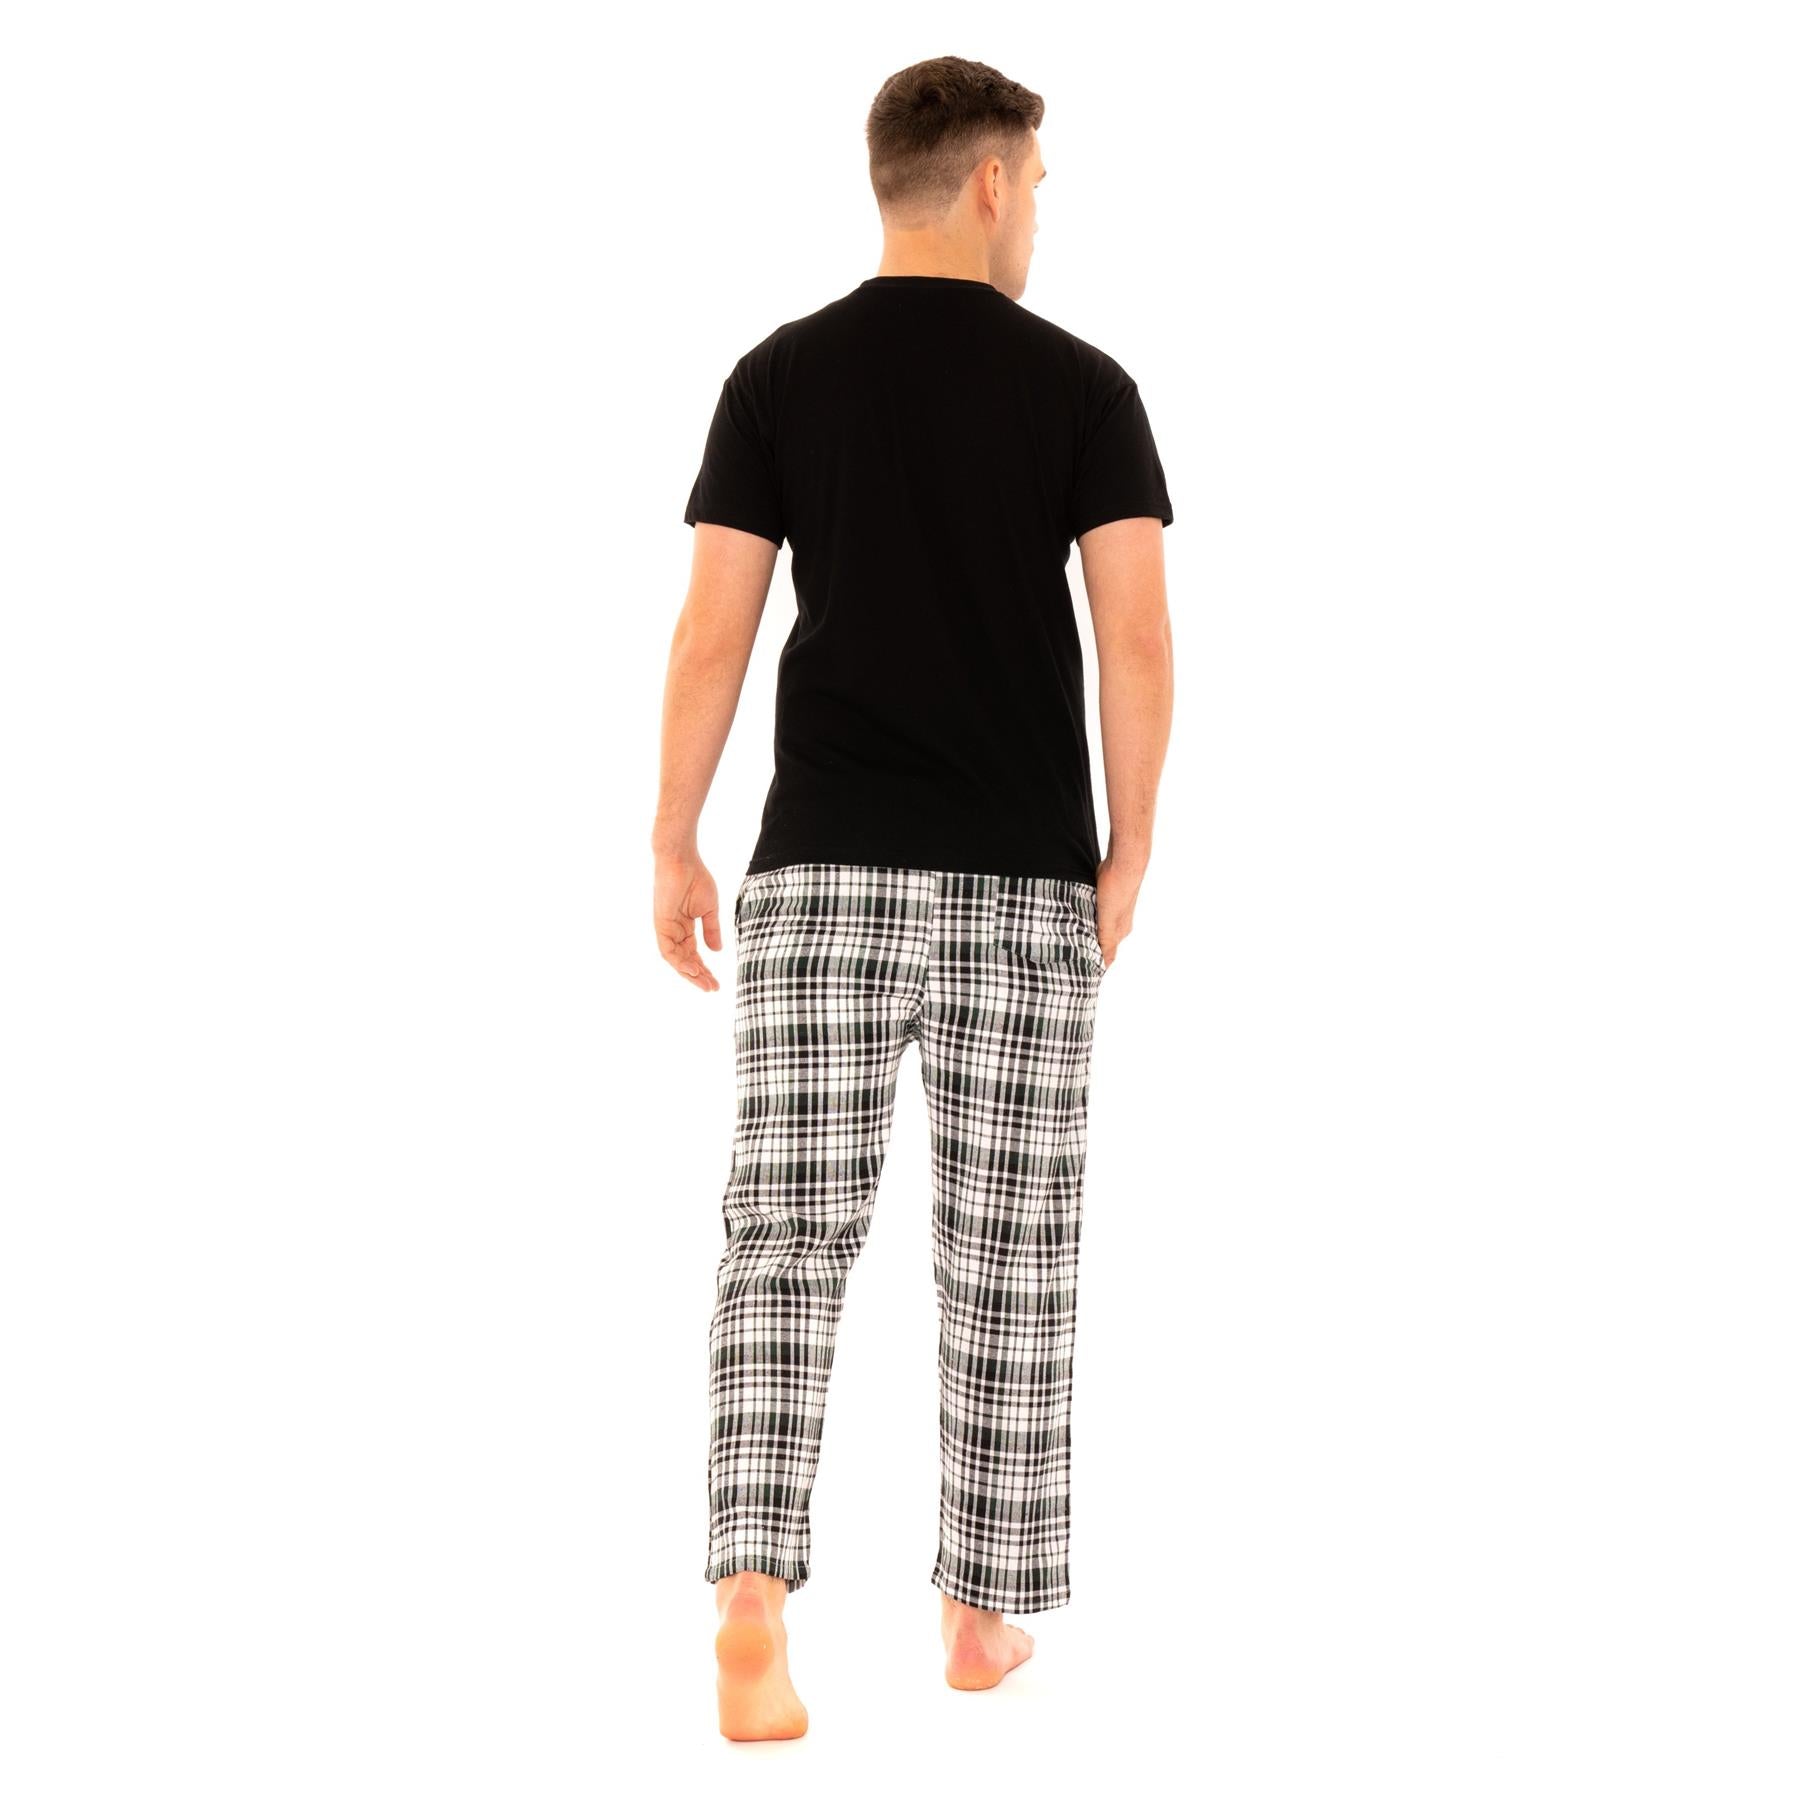 Blue/Red Woven Flannel Lounge Pants